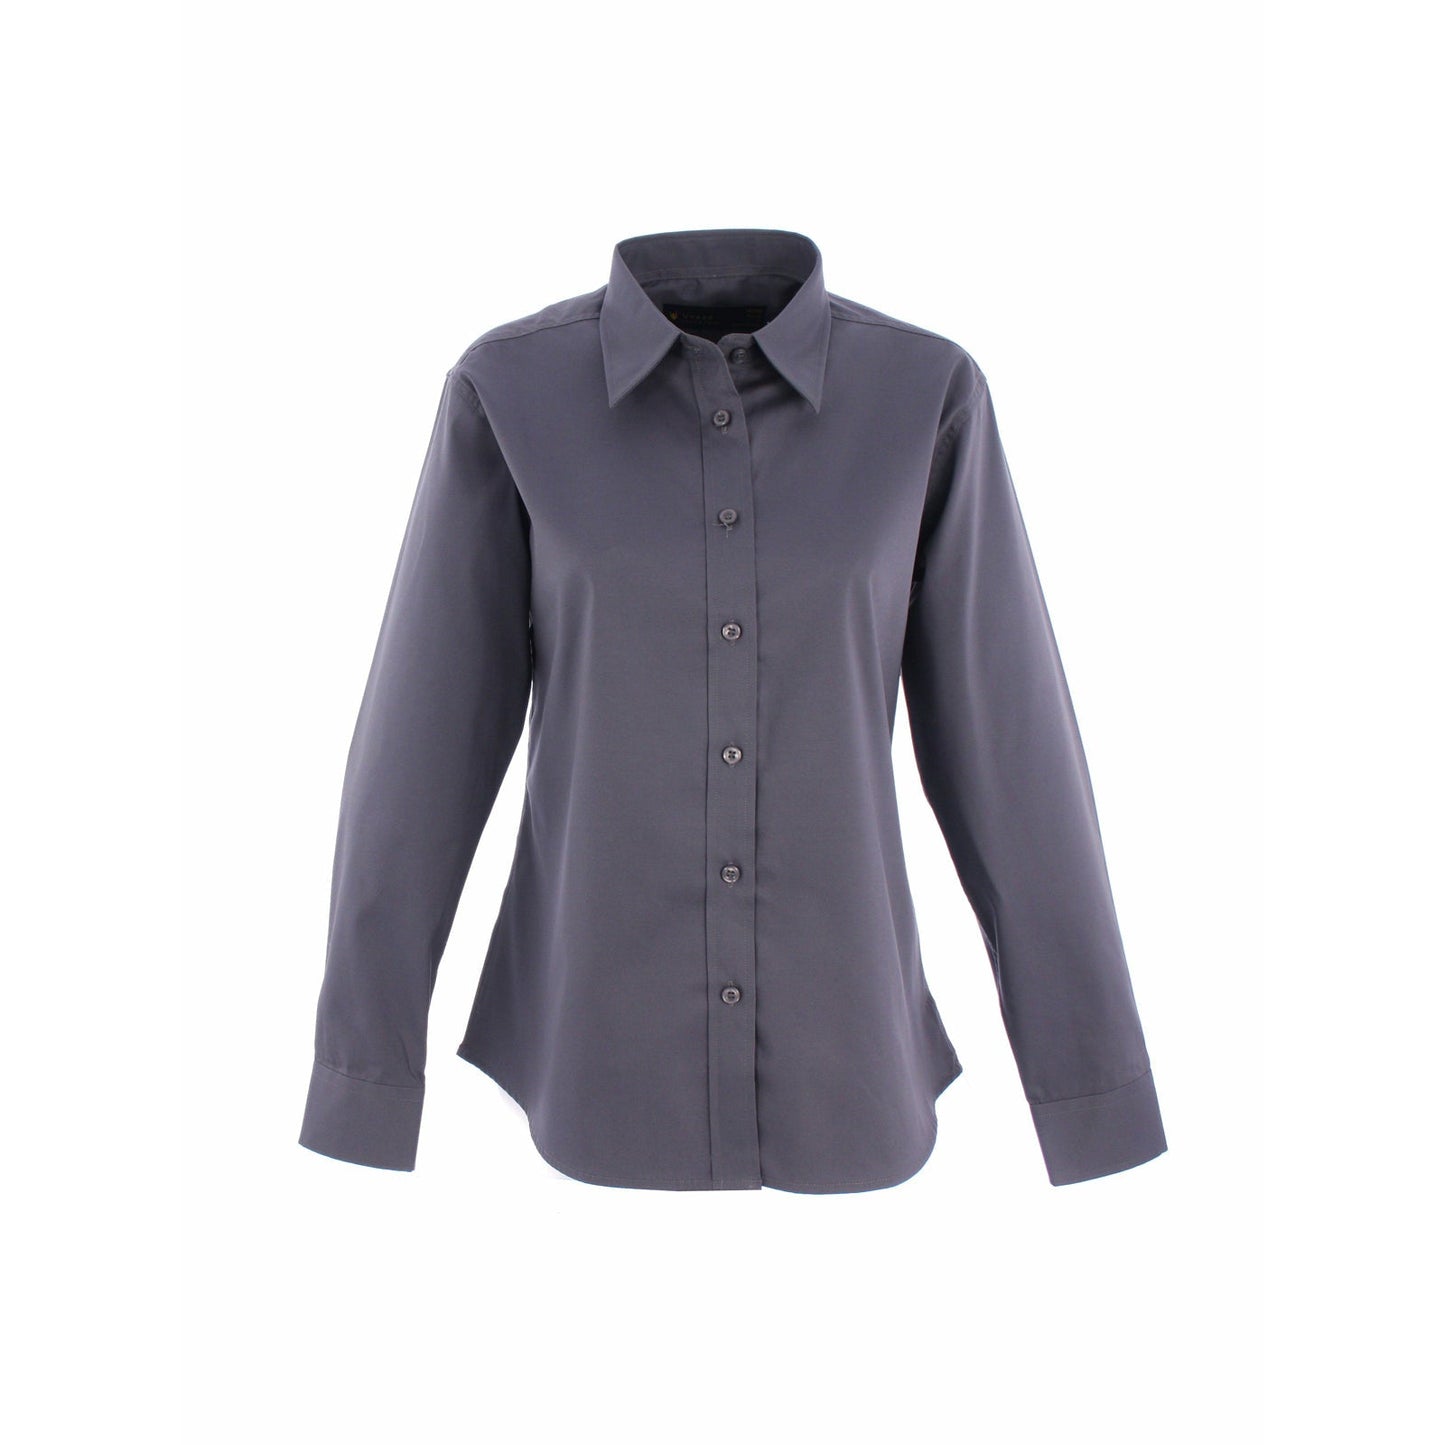 Ladies Pinpoint Oxford Full Sleeve Shirt - Charcoal